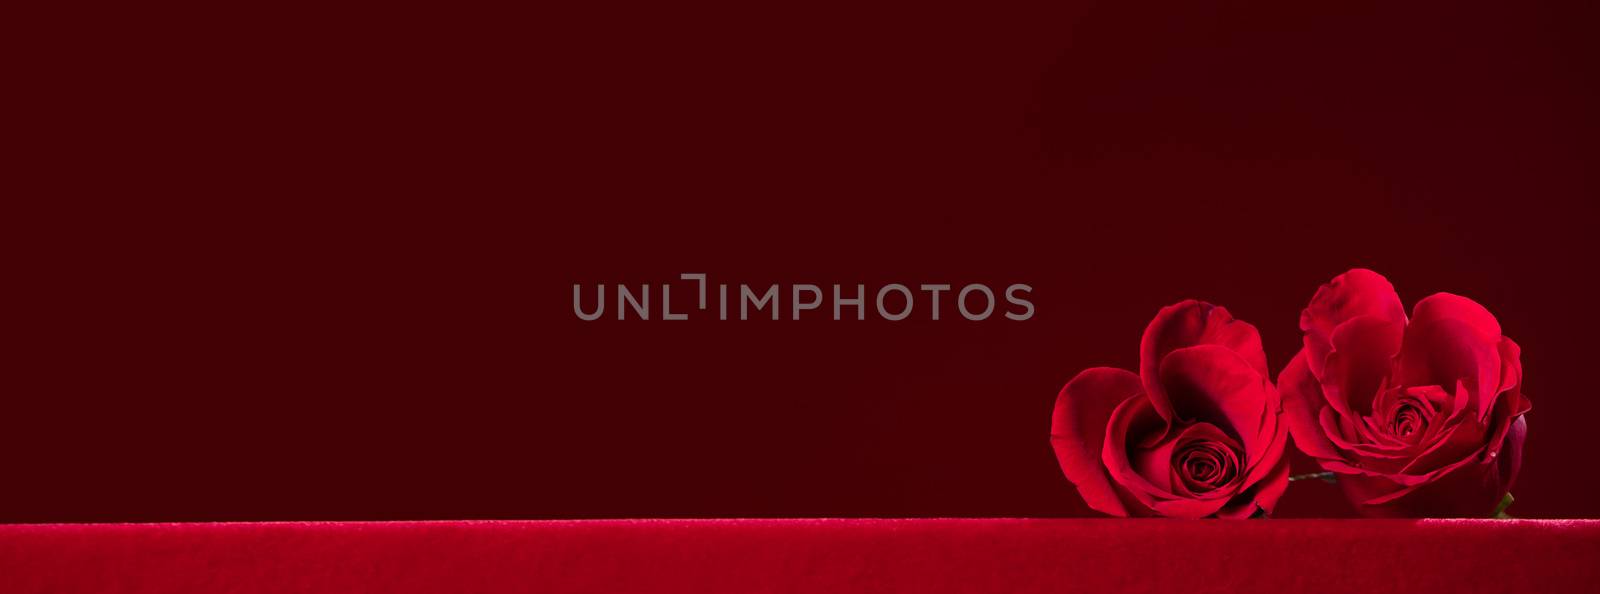 Hearts of red roses on dark red background Valentines day design